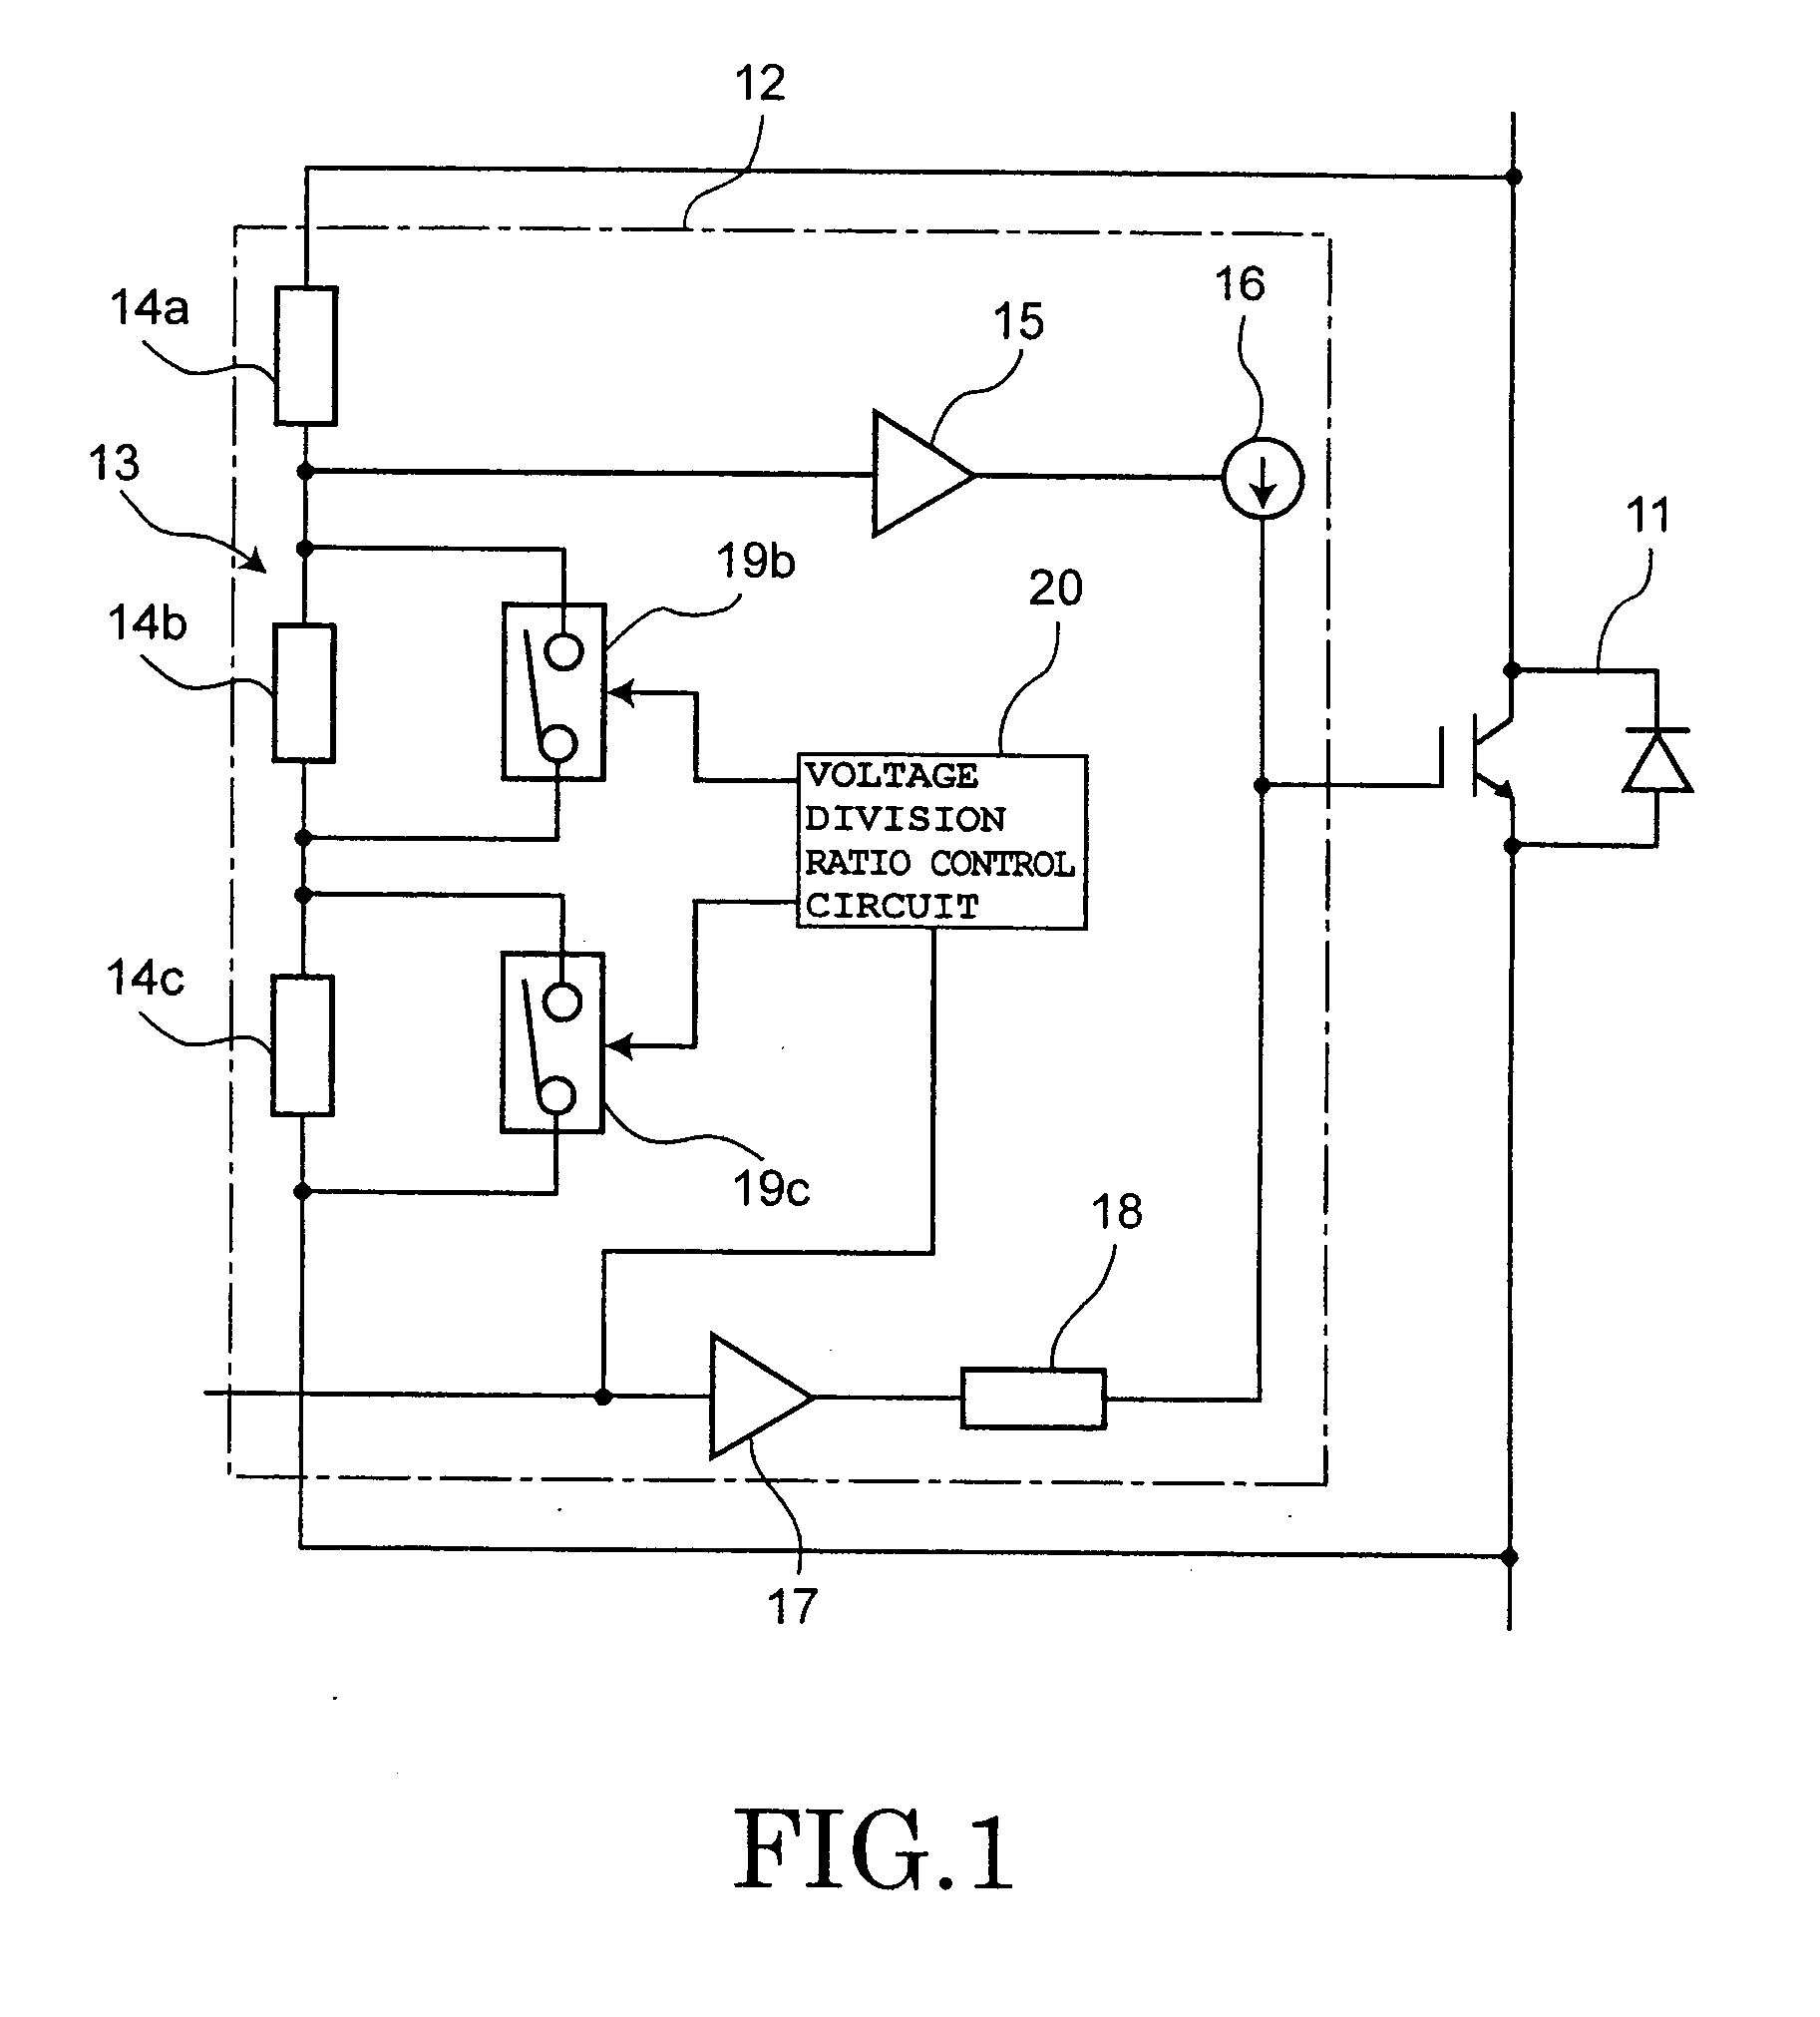 Switching element drive circuit